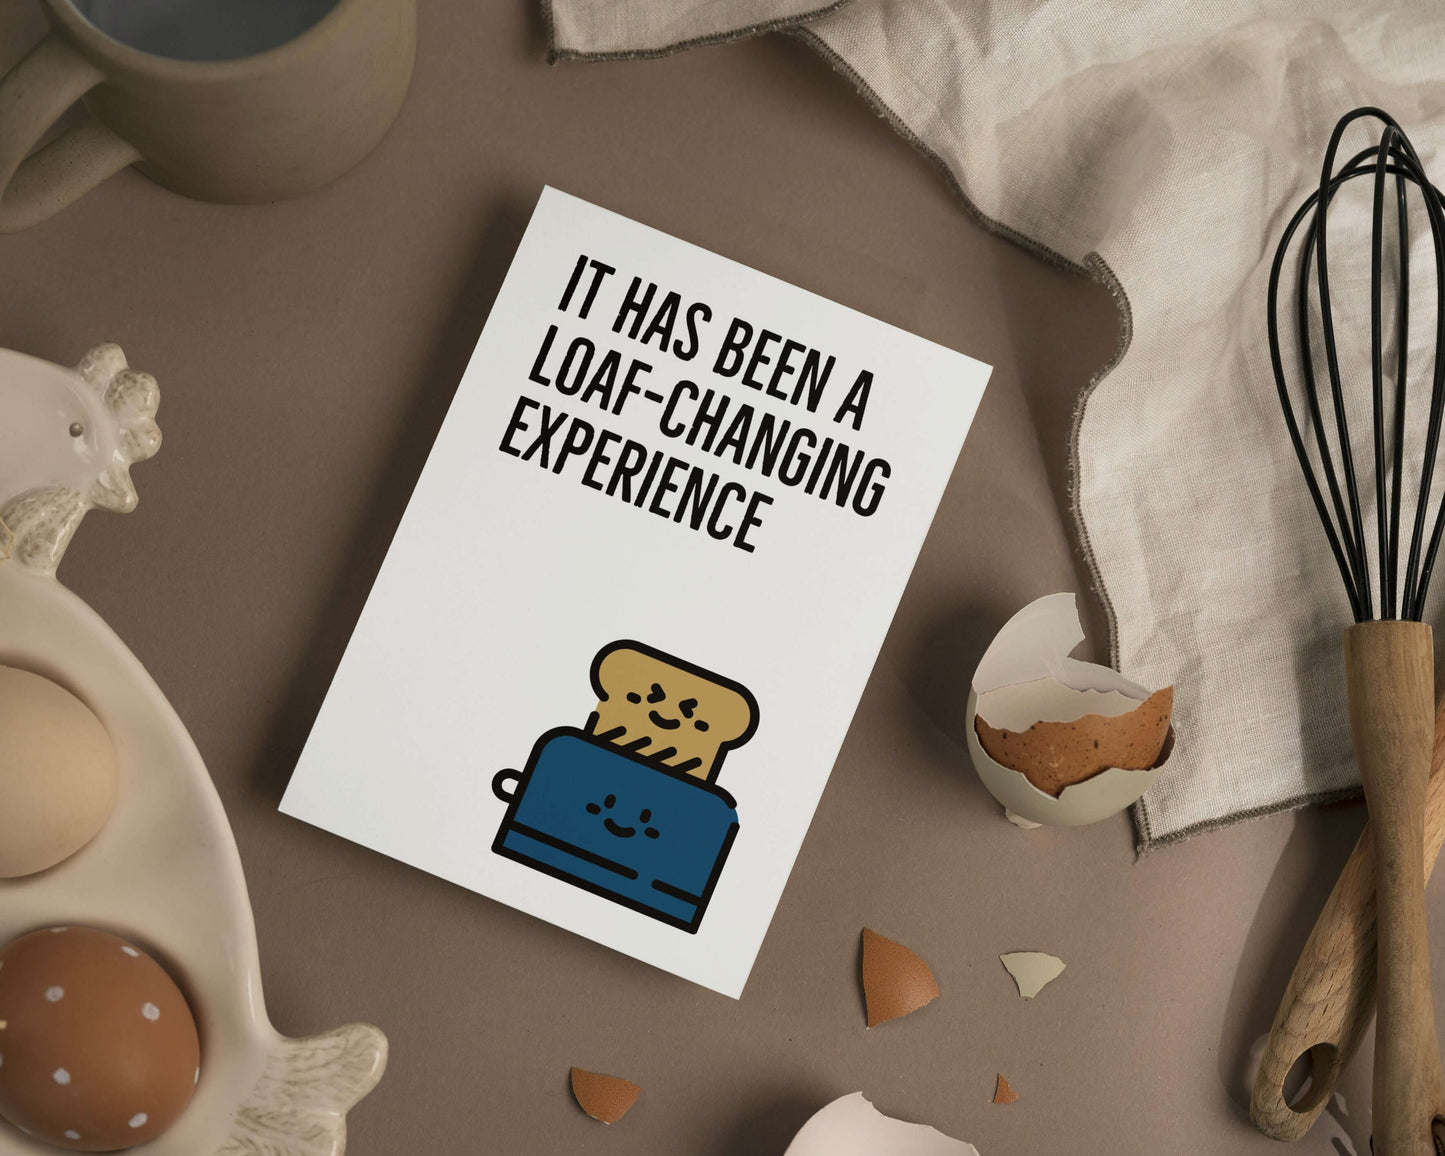 The Card Store UK's It Has Been a Loaf-Changing Experience | Funny Bread Pun Everyday Card | Blank Bread Pun Baker Funny General Greeting Card, General Cards for £3.50 each